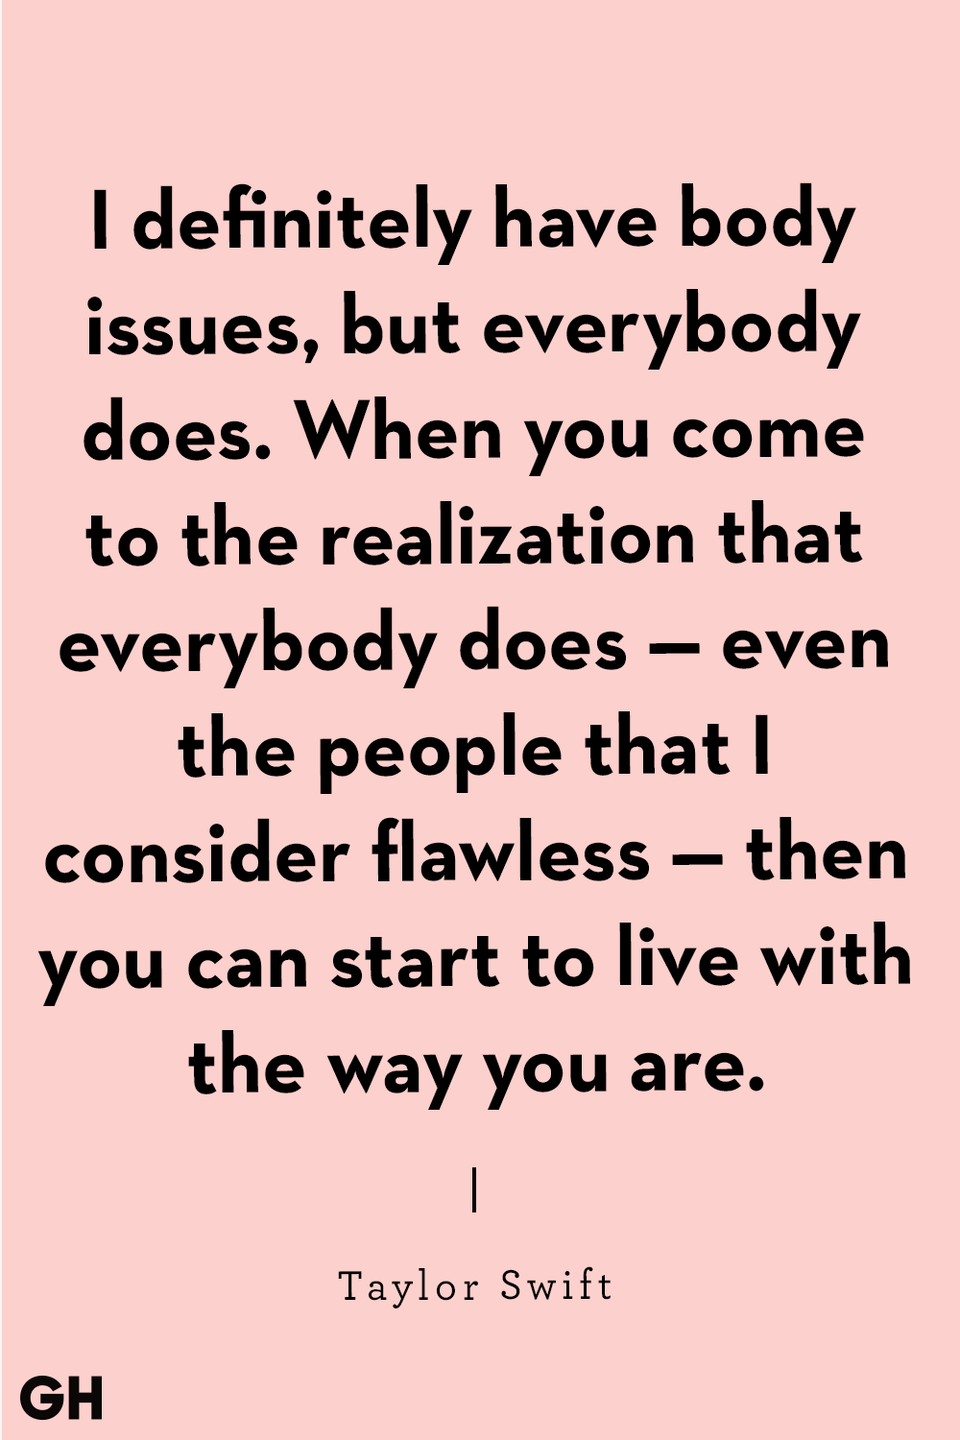 <p>"I definitely have body issues, but everybody does. When you come to the realization that everybody does — even the people that I consider flawless — then you can start to live with the way you are." </p>